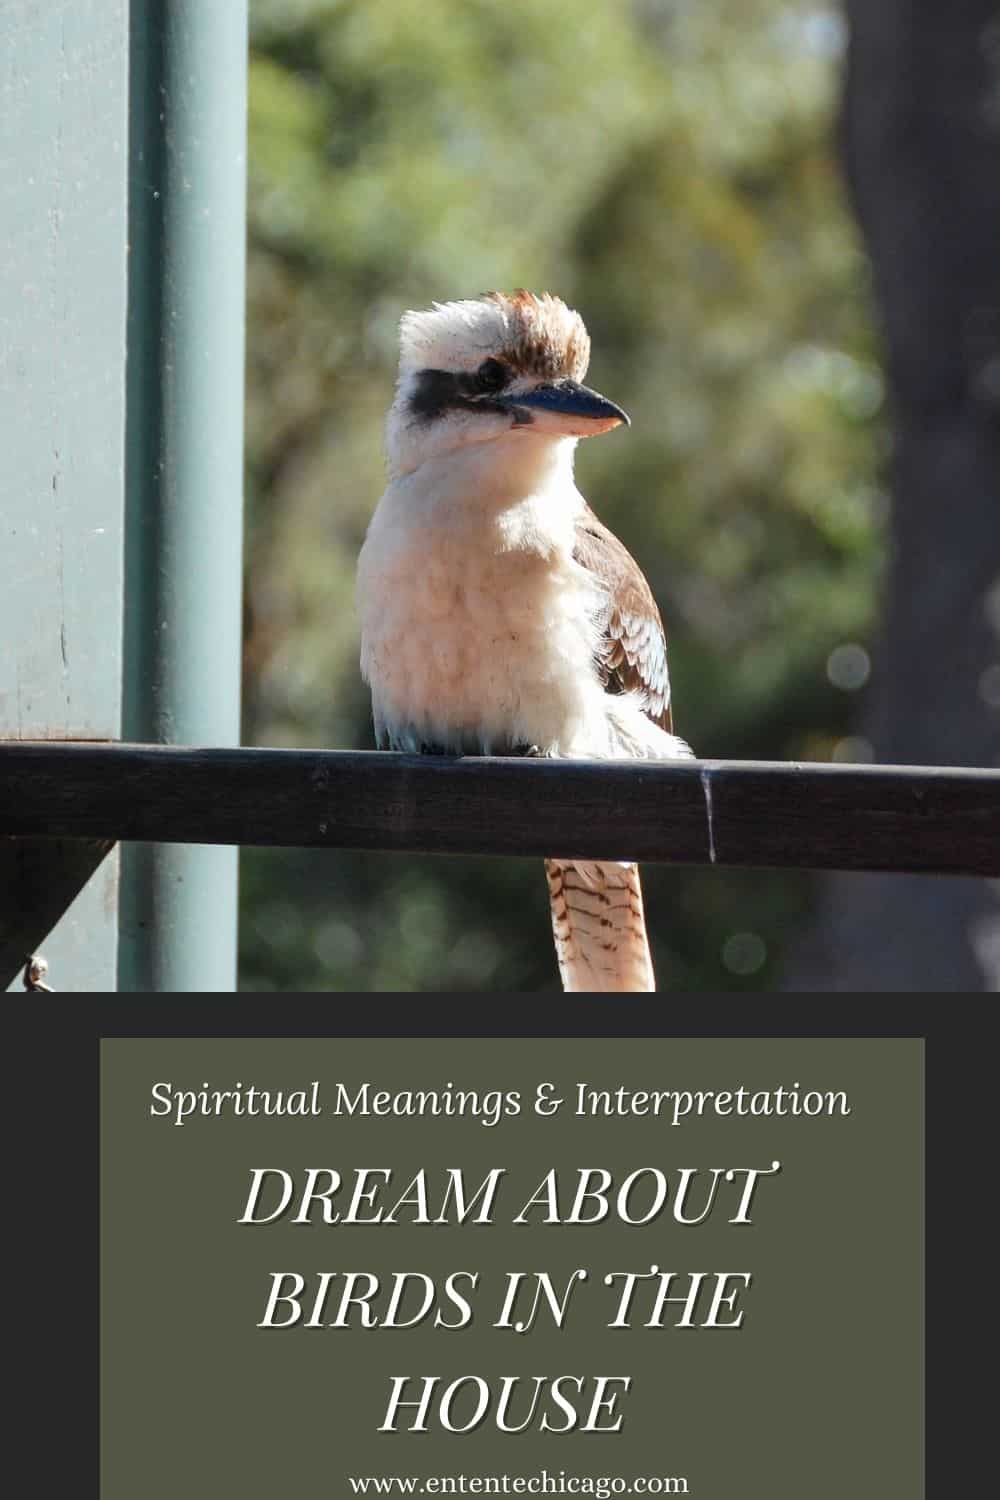 Dream About Birds In The House (Spiritual Meanings & Interpretation)